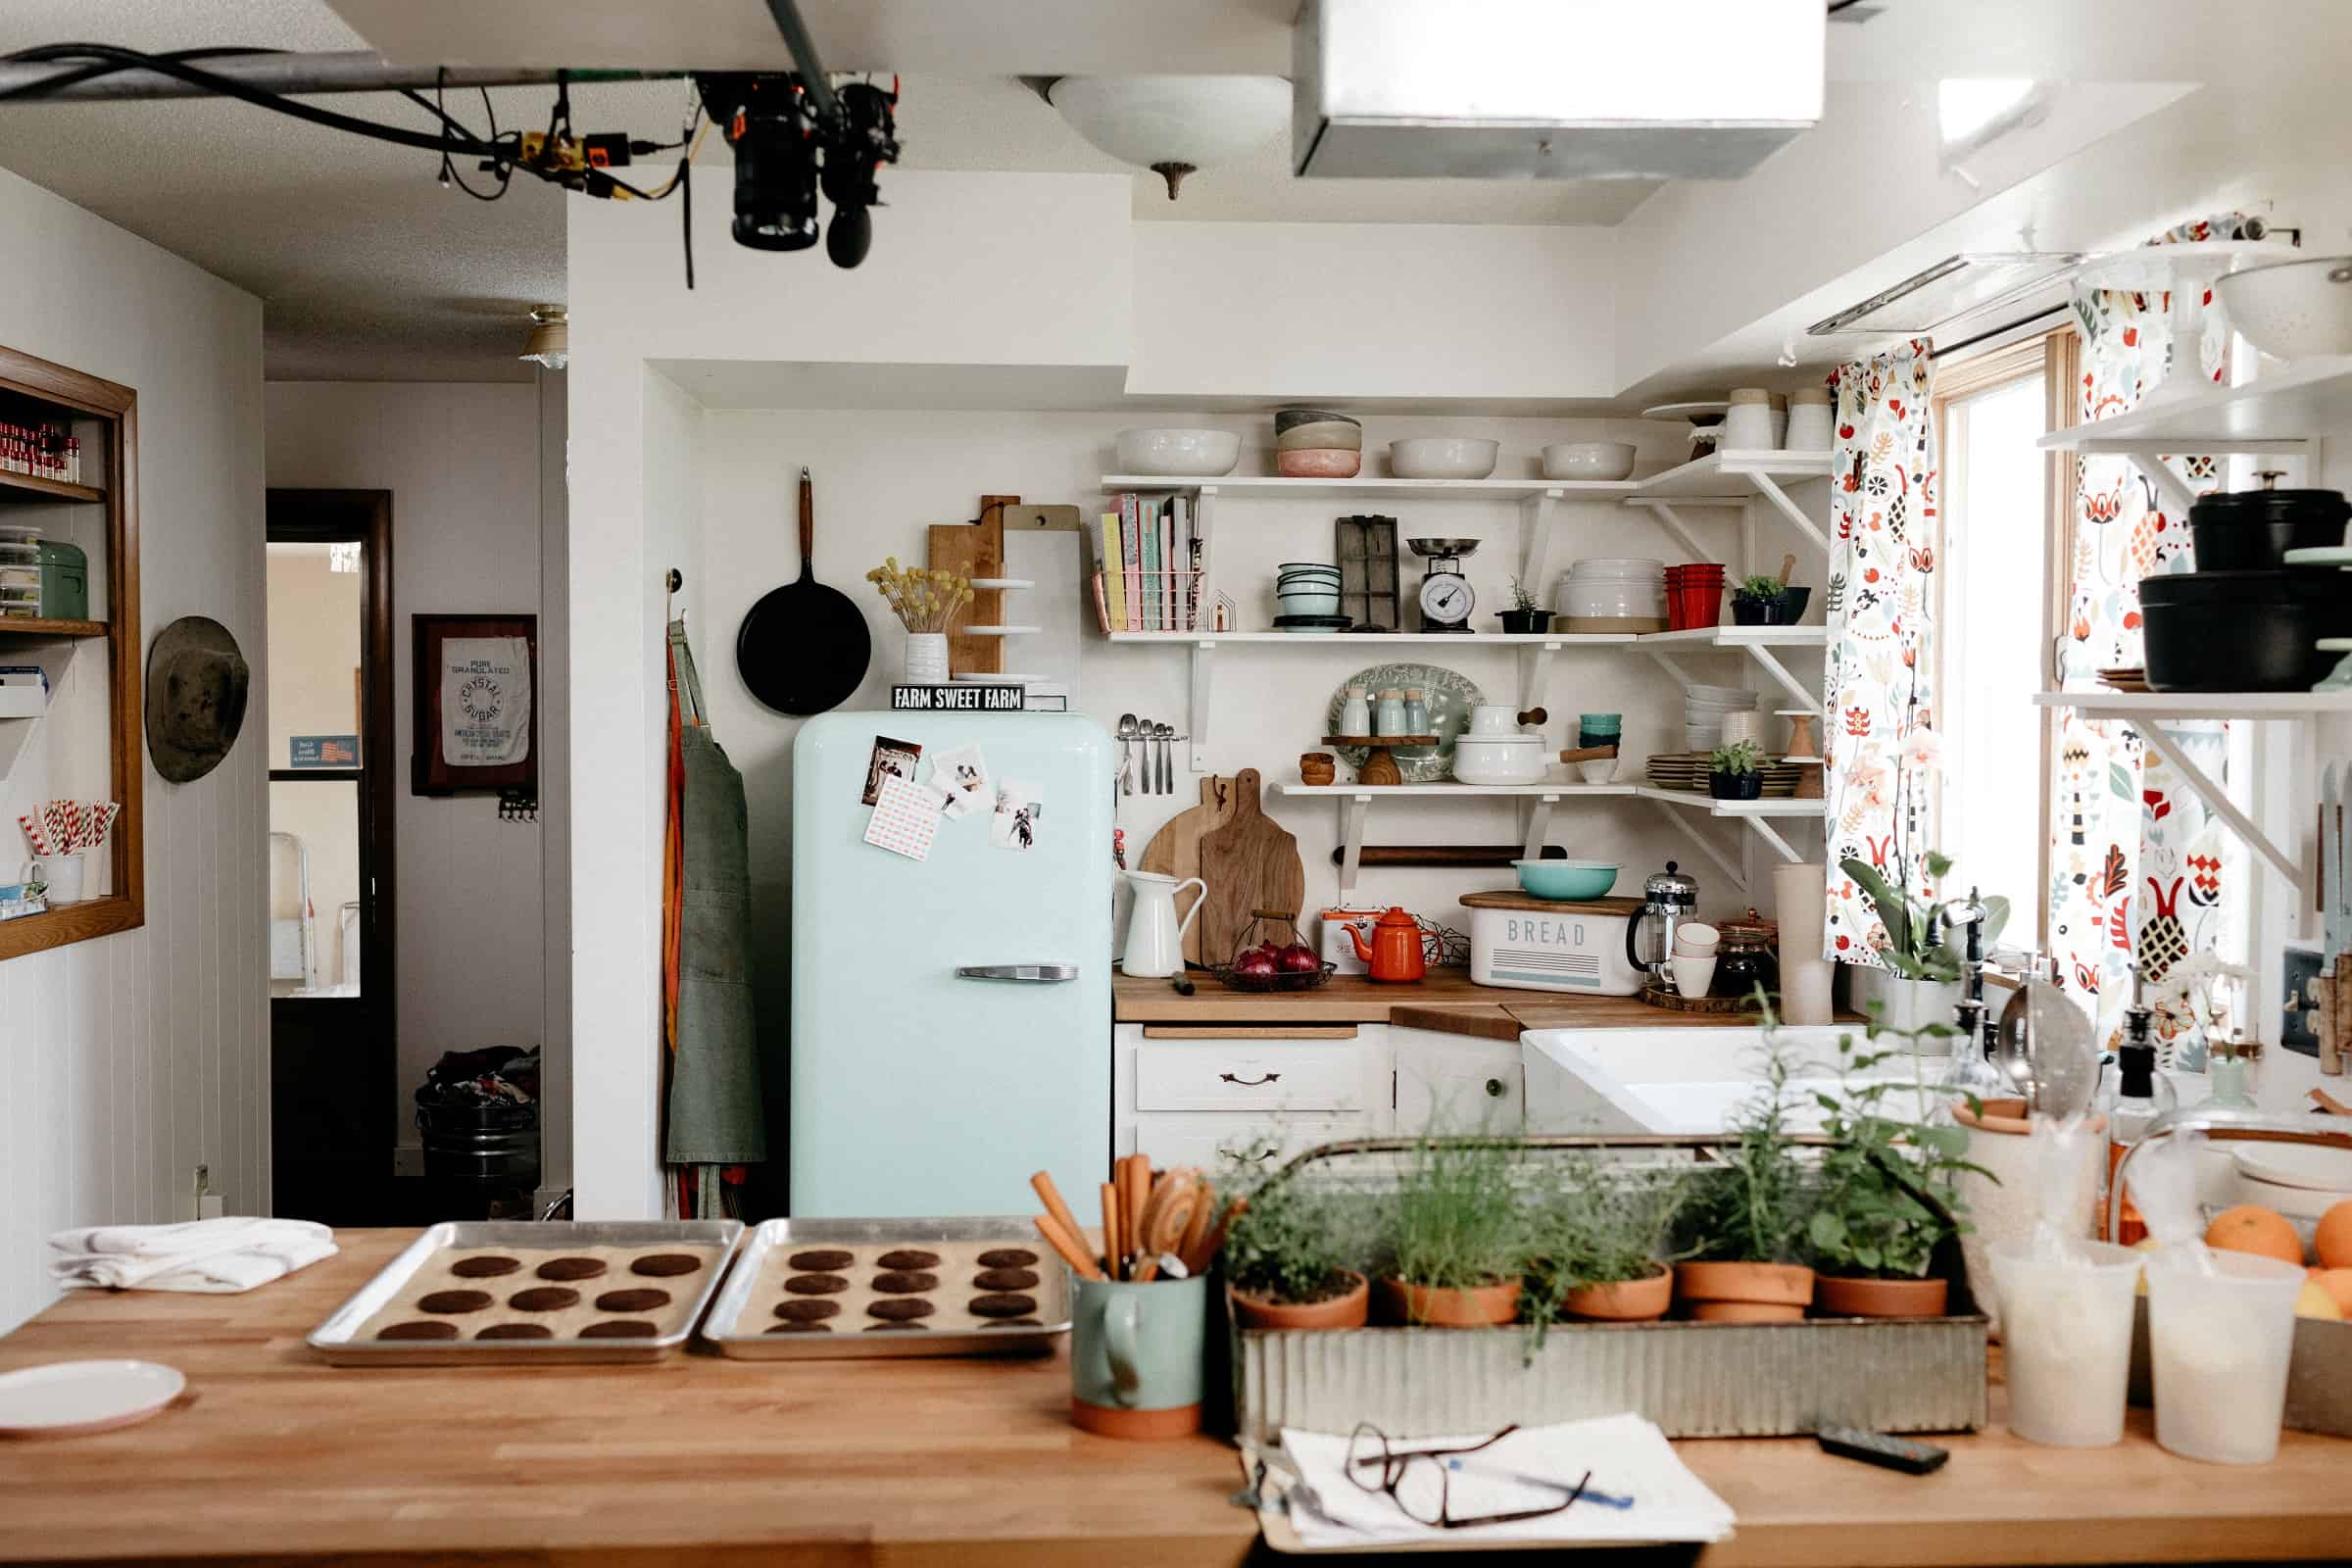 Host Molly Yeh's kitchen, as seen on Girl Meets Farm (Credits: Food Network)